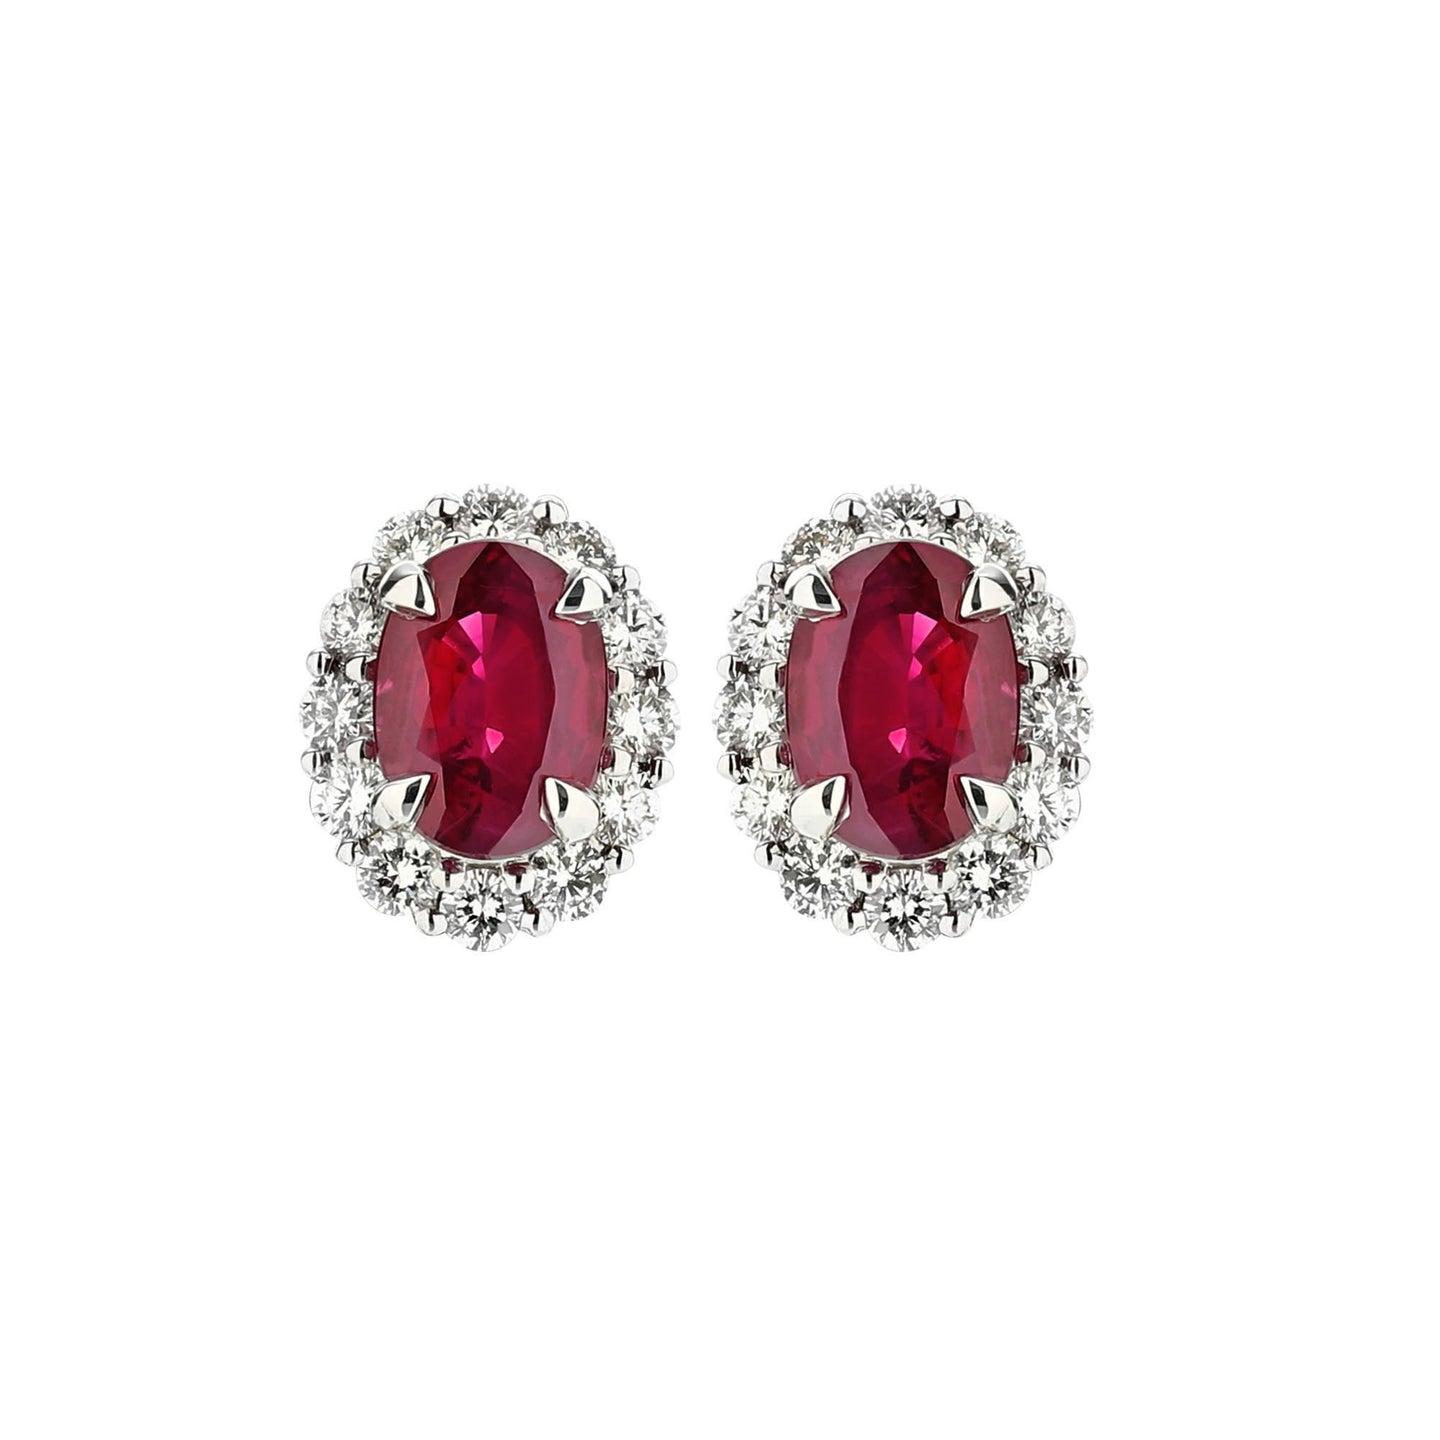 Sabel Collection 14K White Gold Oval Ruby and Diamond Halo Stud Earrings